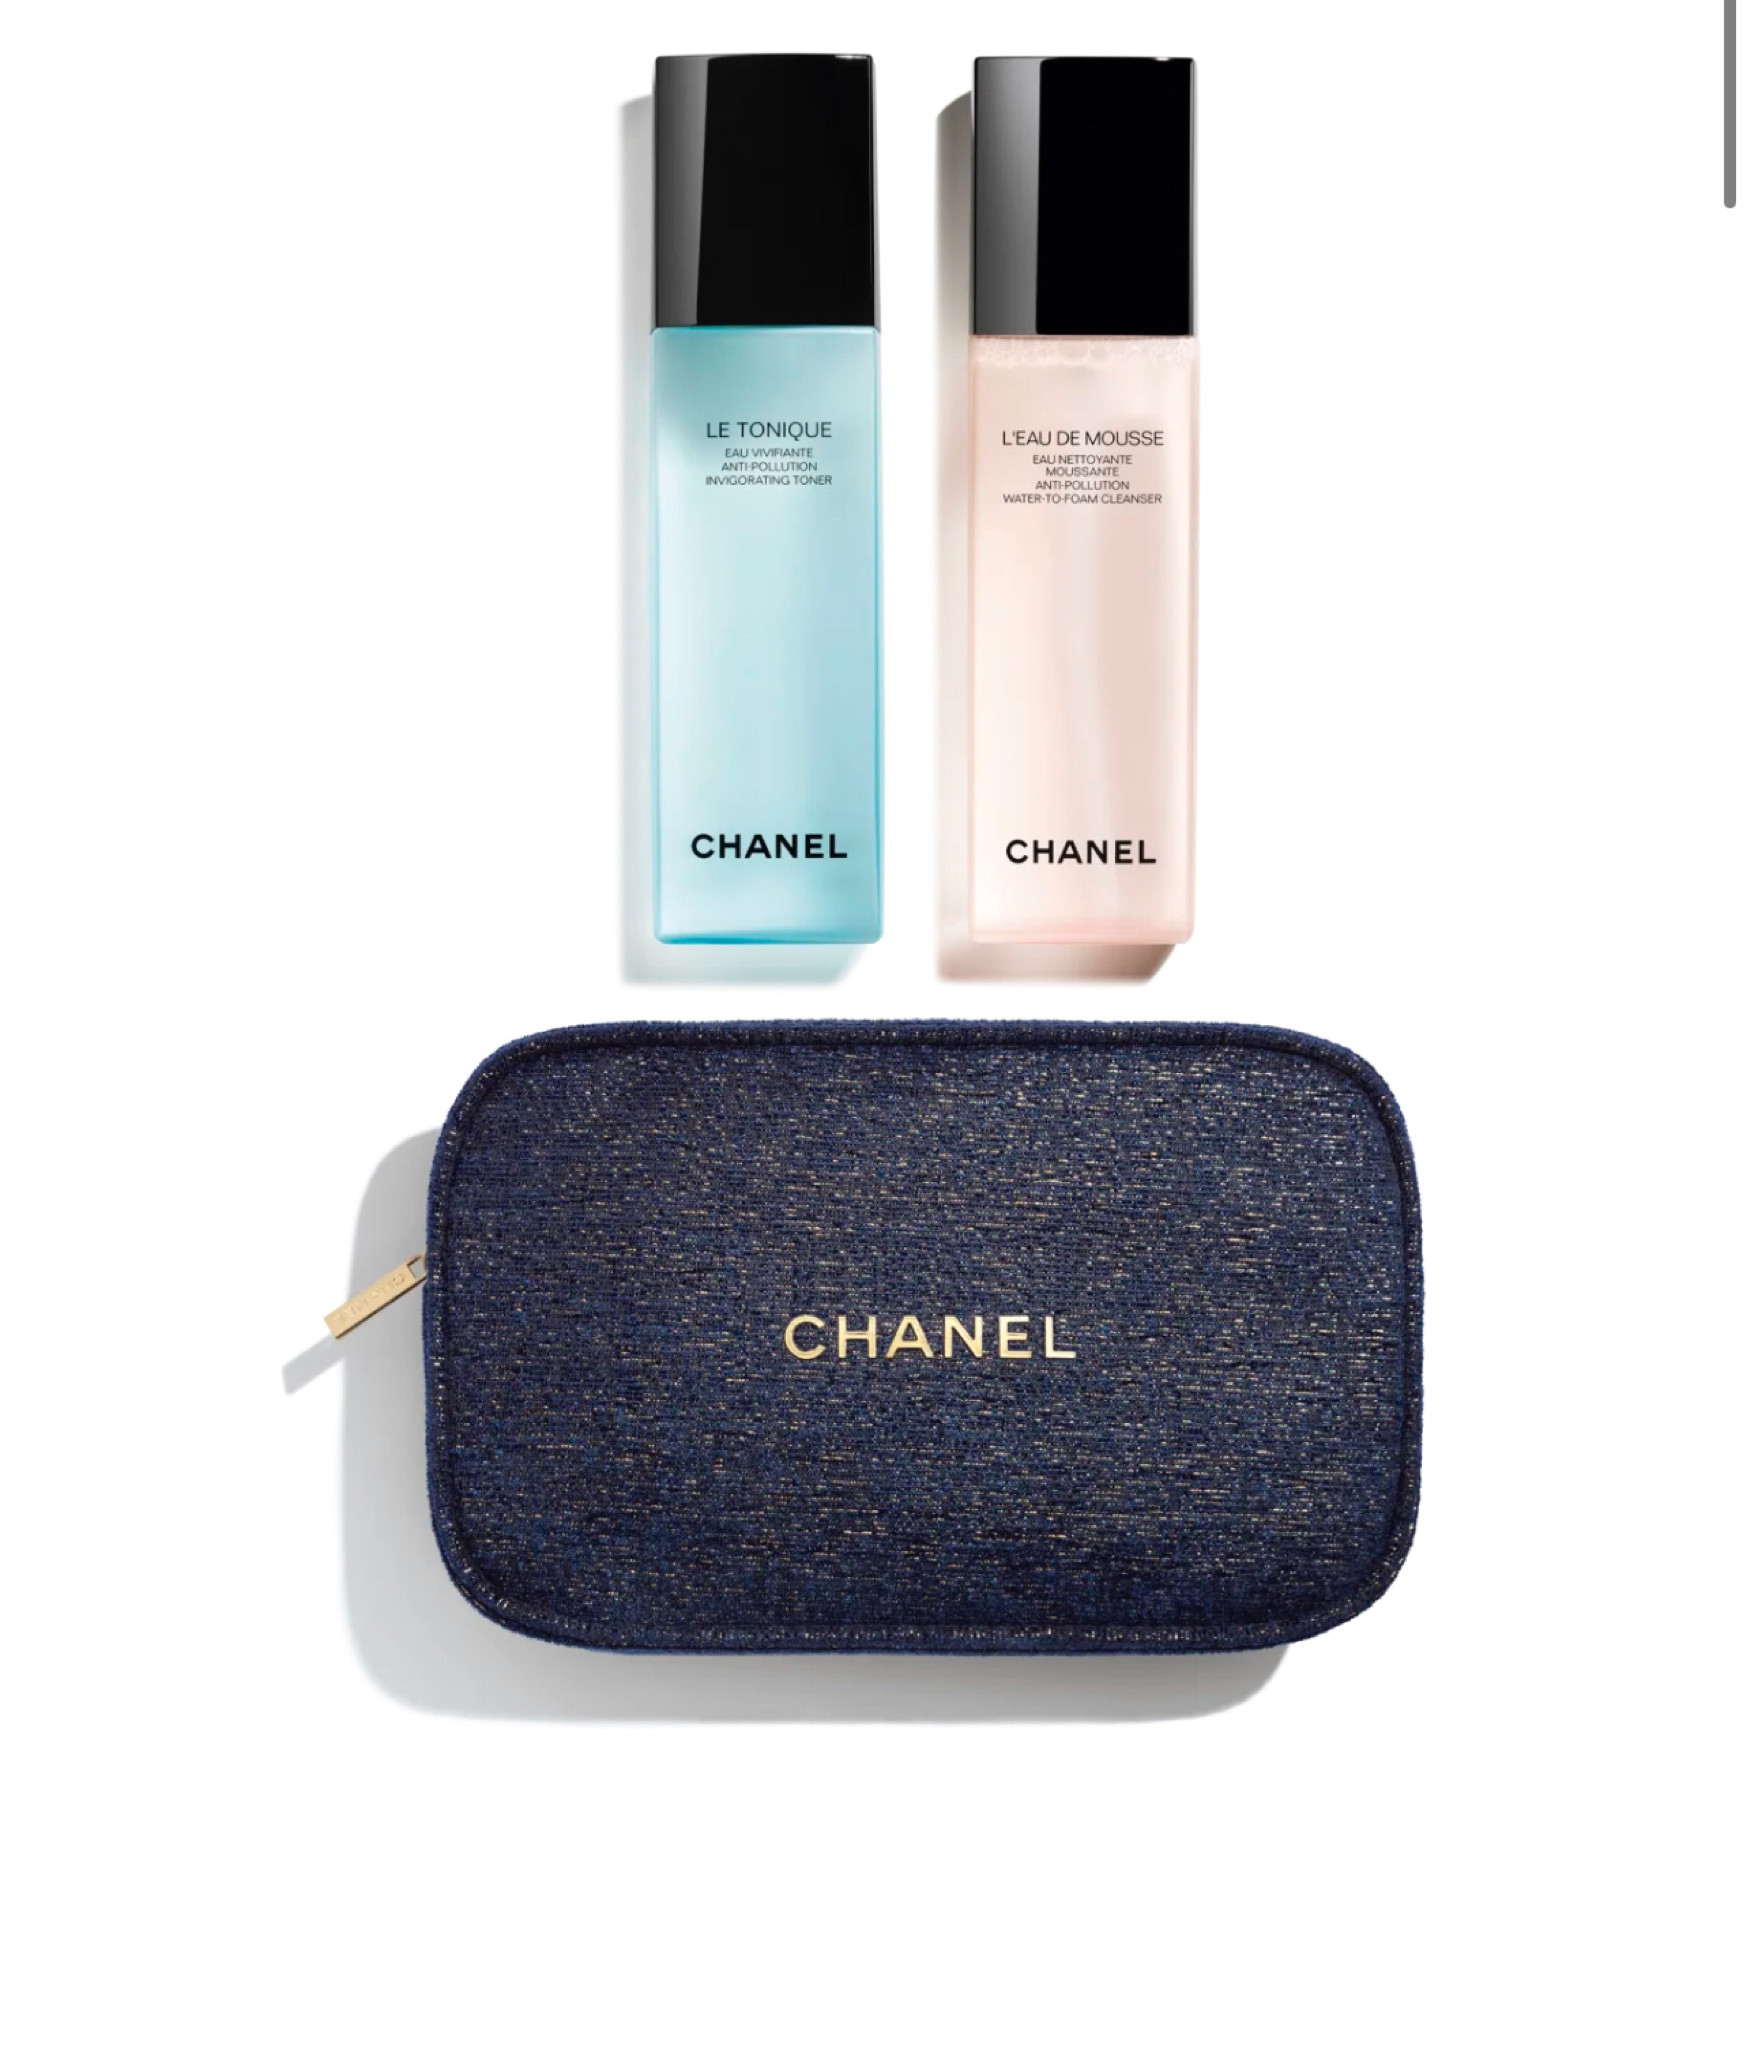 Chanel Black Friday Gift Set is Now Available #chanel